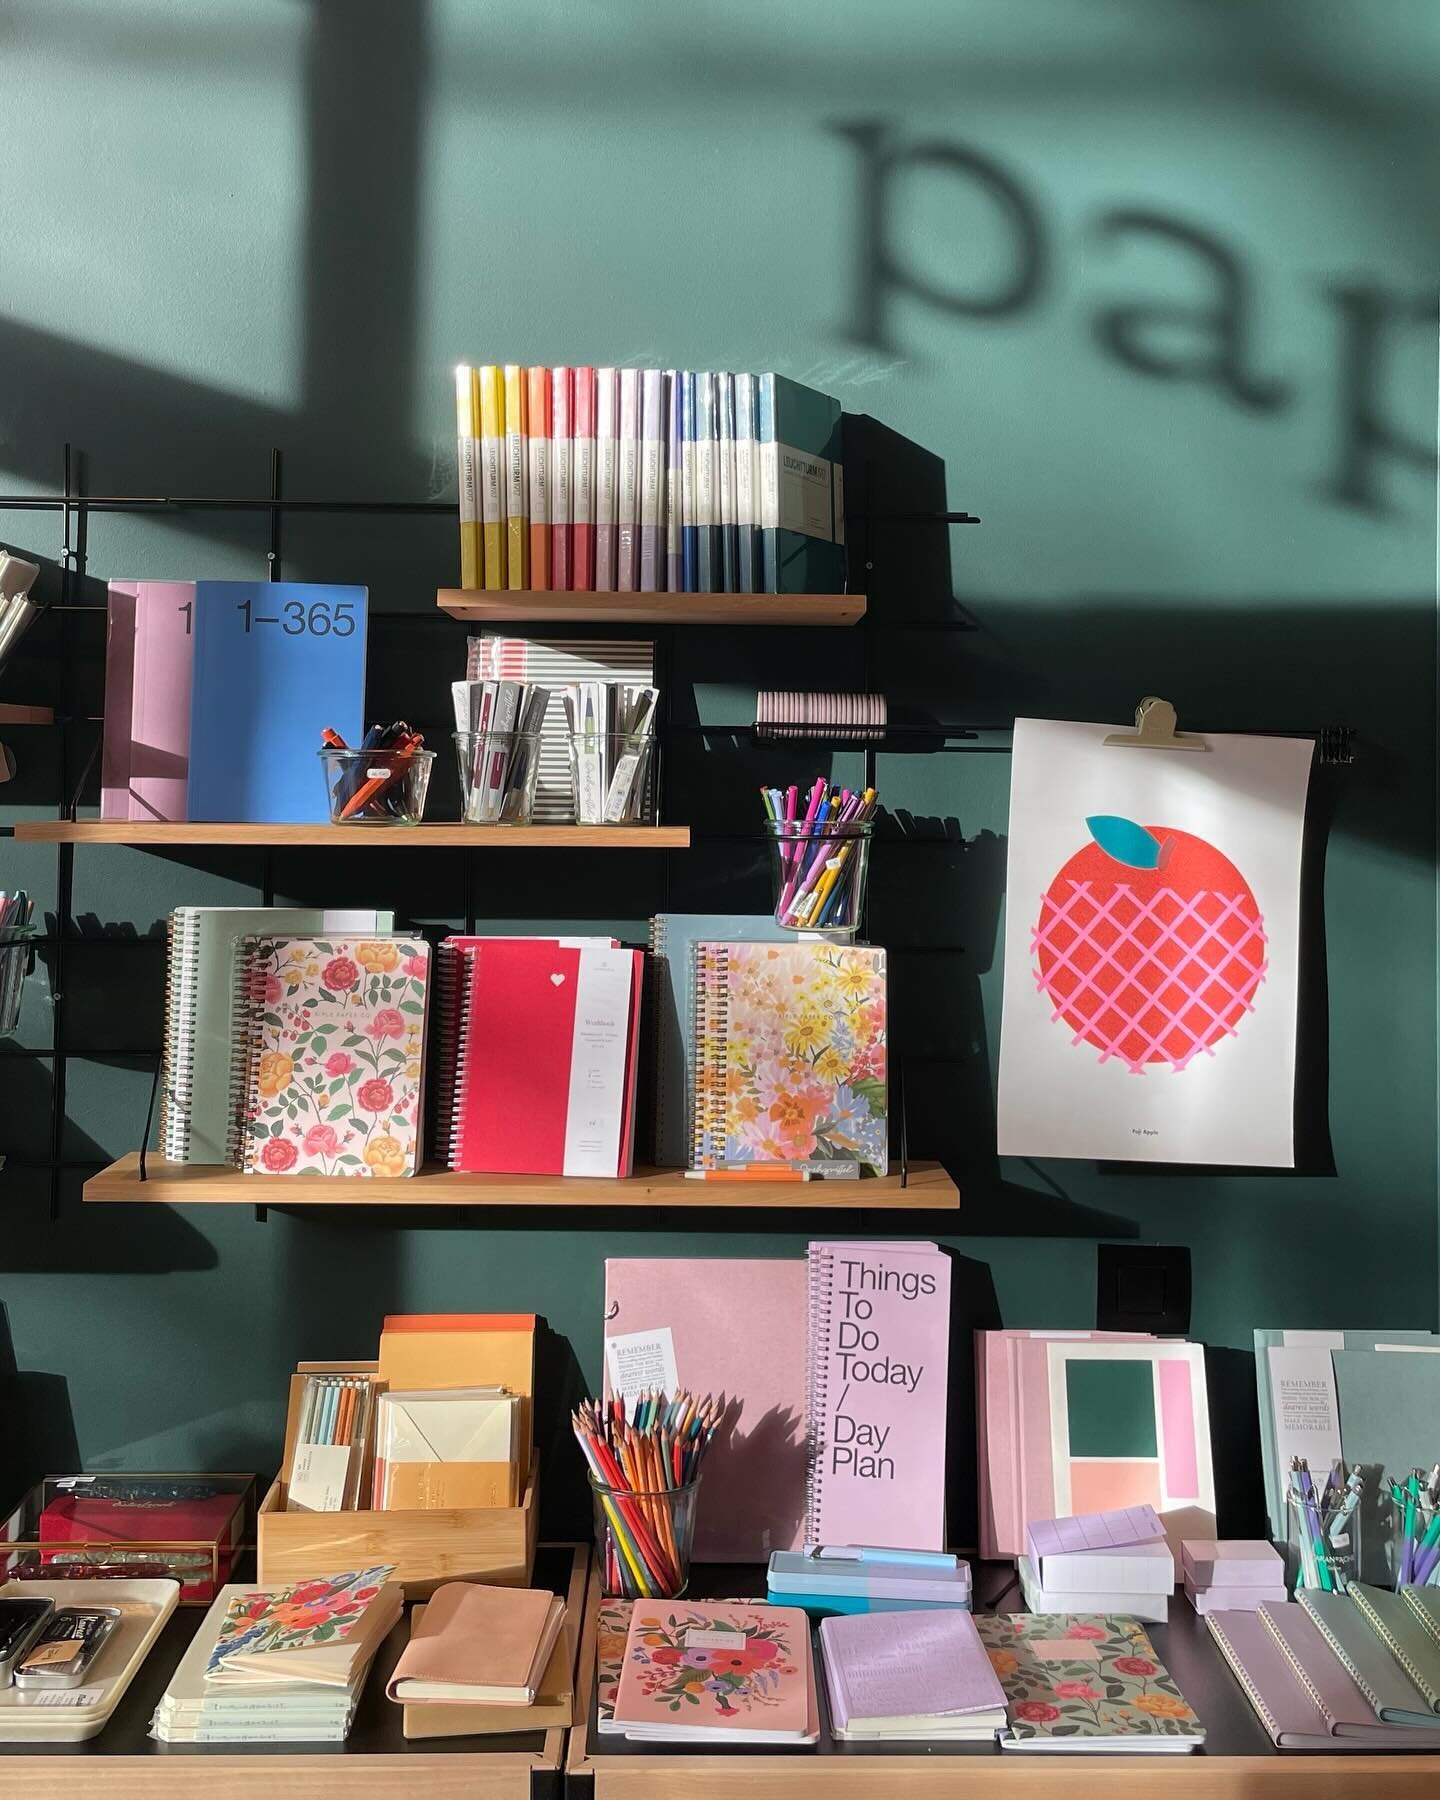 Atmospheres 🌈🌸🌹☀️
We are open 11-18h ! See you there! 

P A P I E R. Paper, drawings &amp; more

~~~
#papier #papierbrussels #papeterieoriginale #papeterie #stationerystore #stationeryaddict #stationerylovers #passionpapeterie #commercelocal #shop